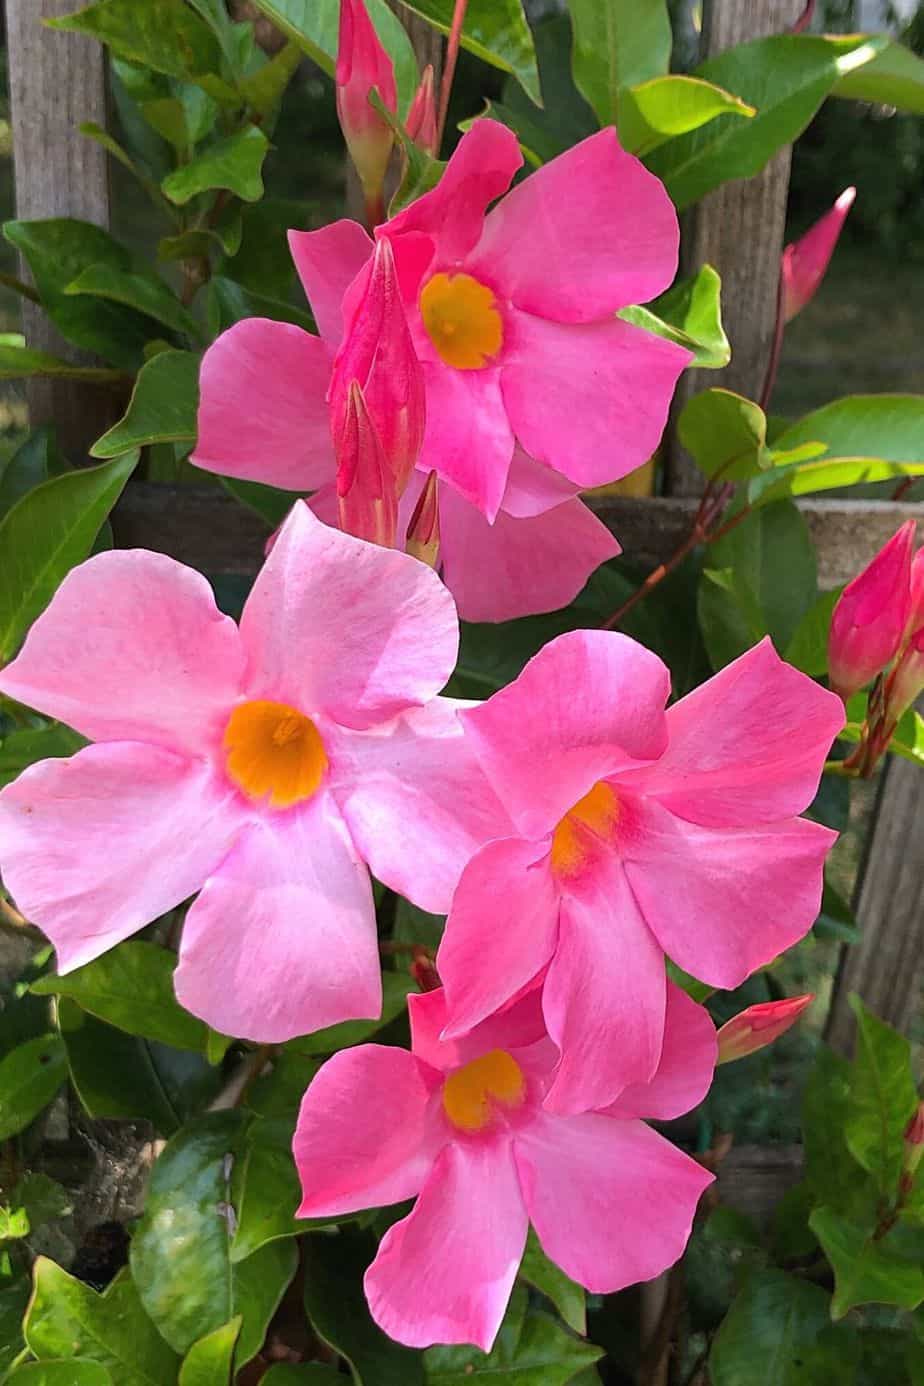 Mandevilla is a climbing plant that you can grow on a supporting beam on your west-facing balcony